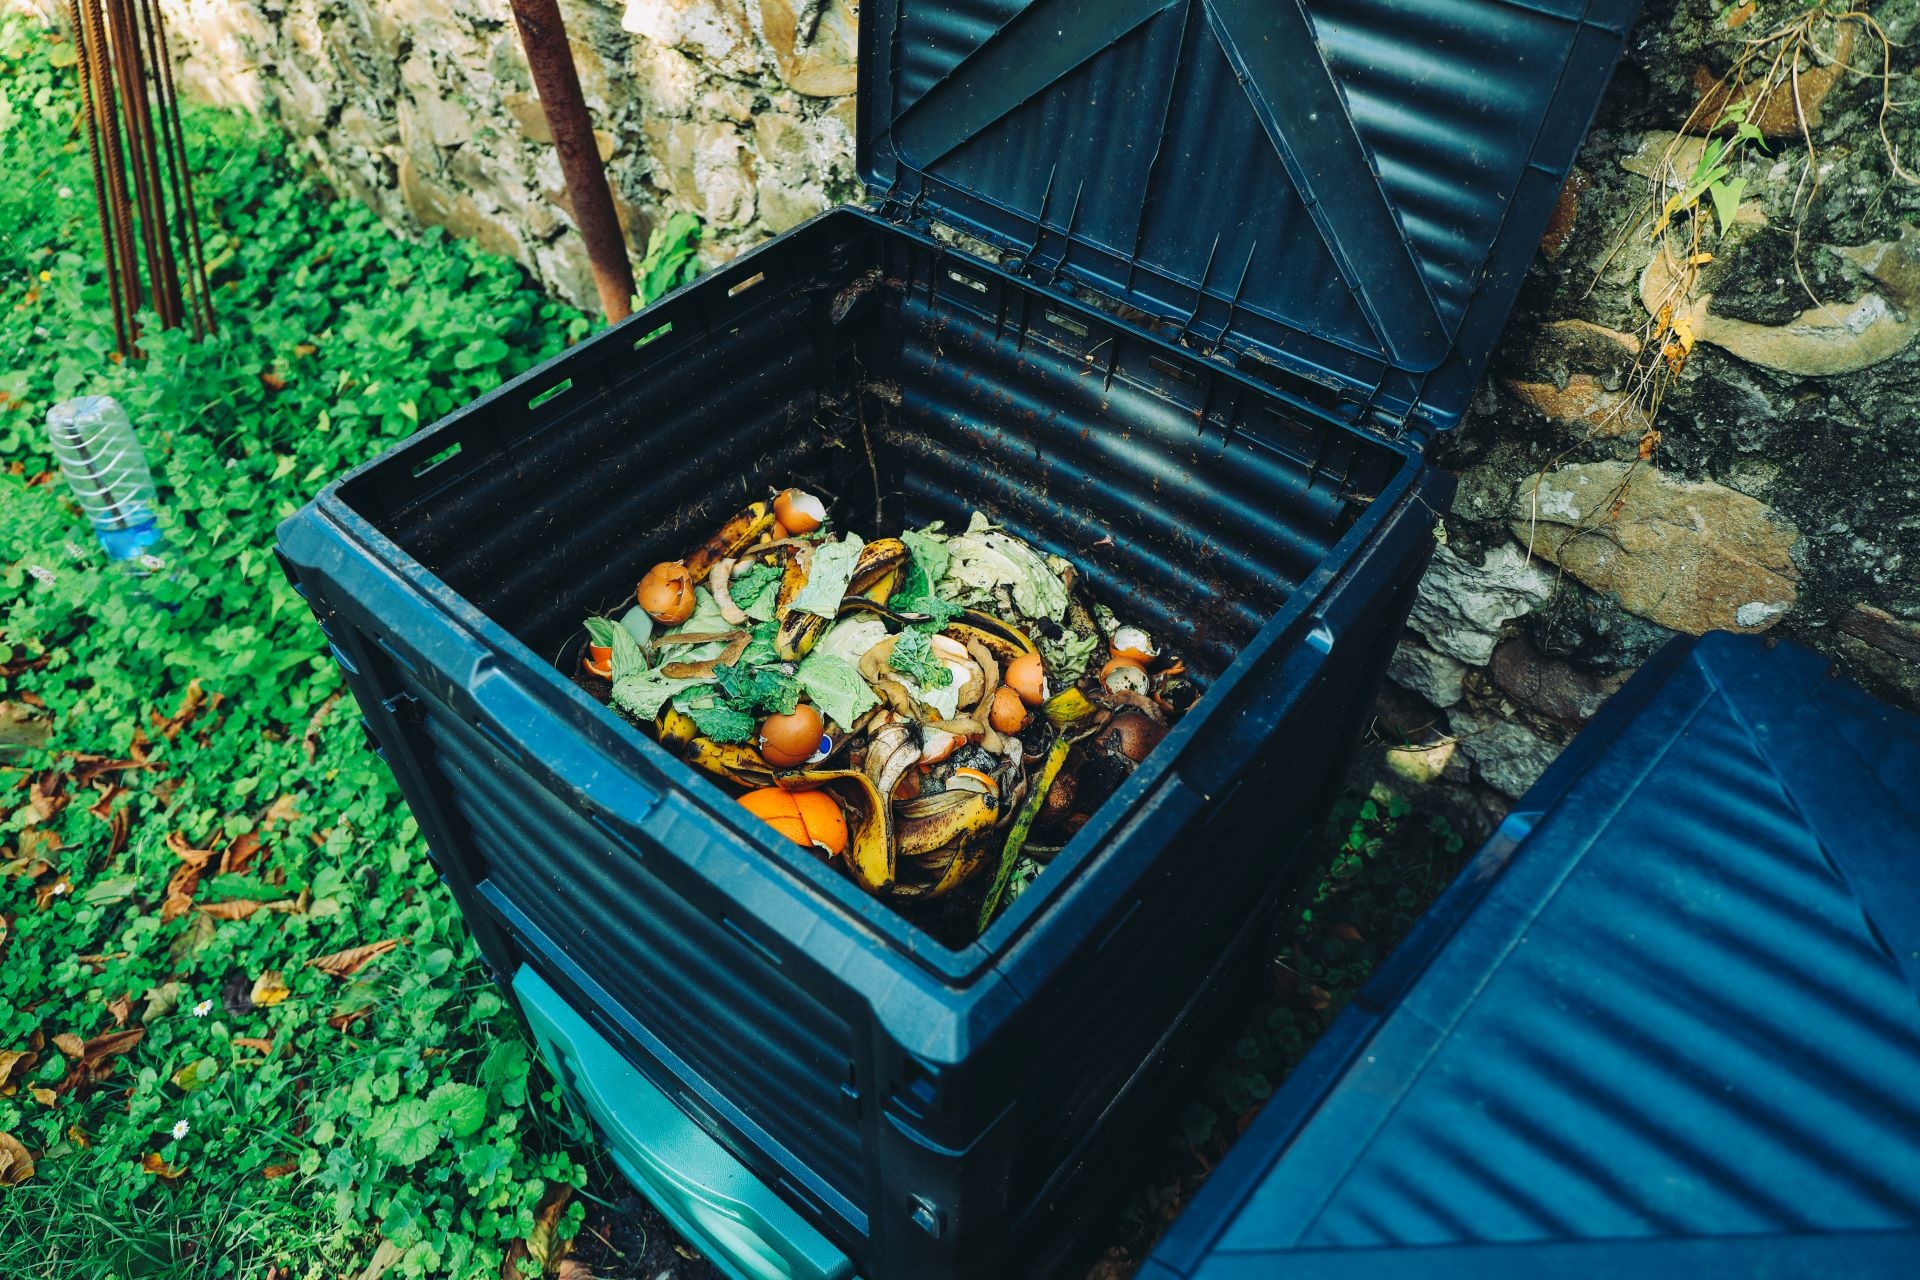 The Best Compost Bins to Buy in 2023